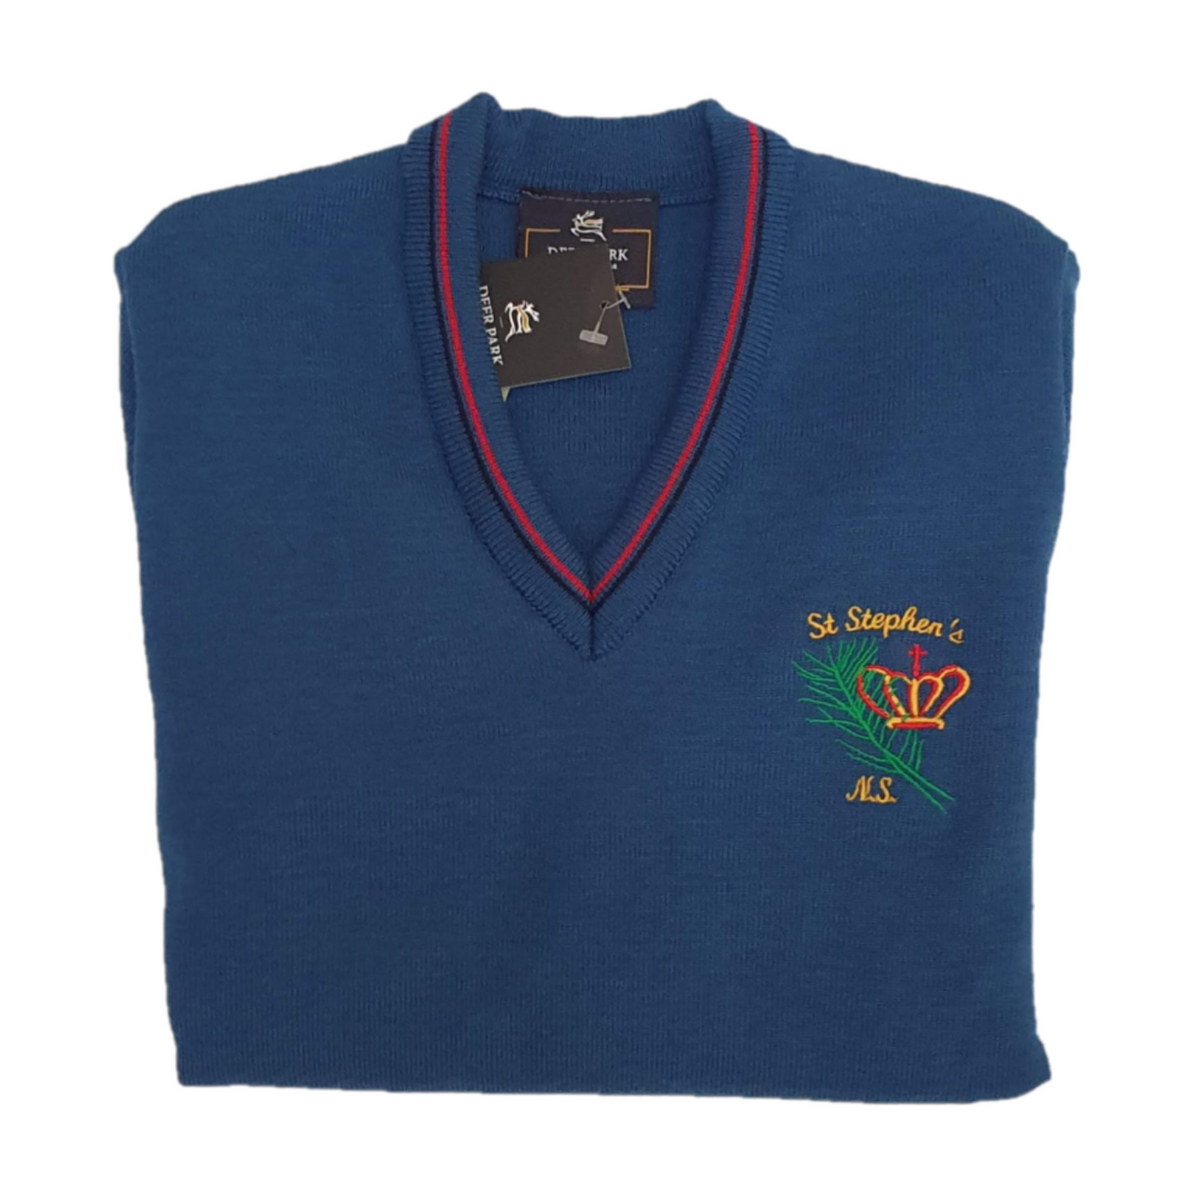 St Stephens National School Crested Jumper - Wool Mix